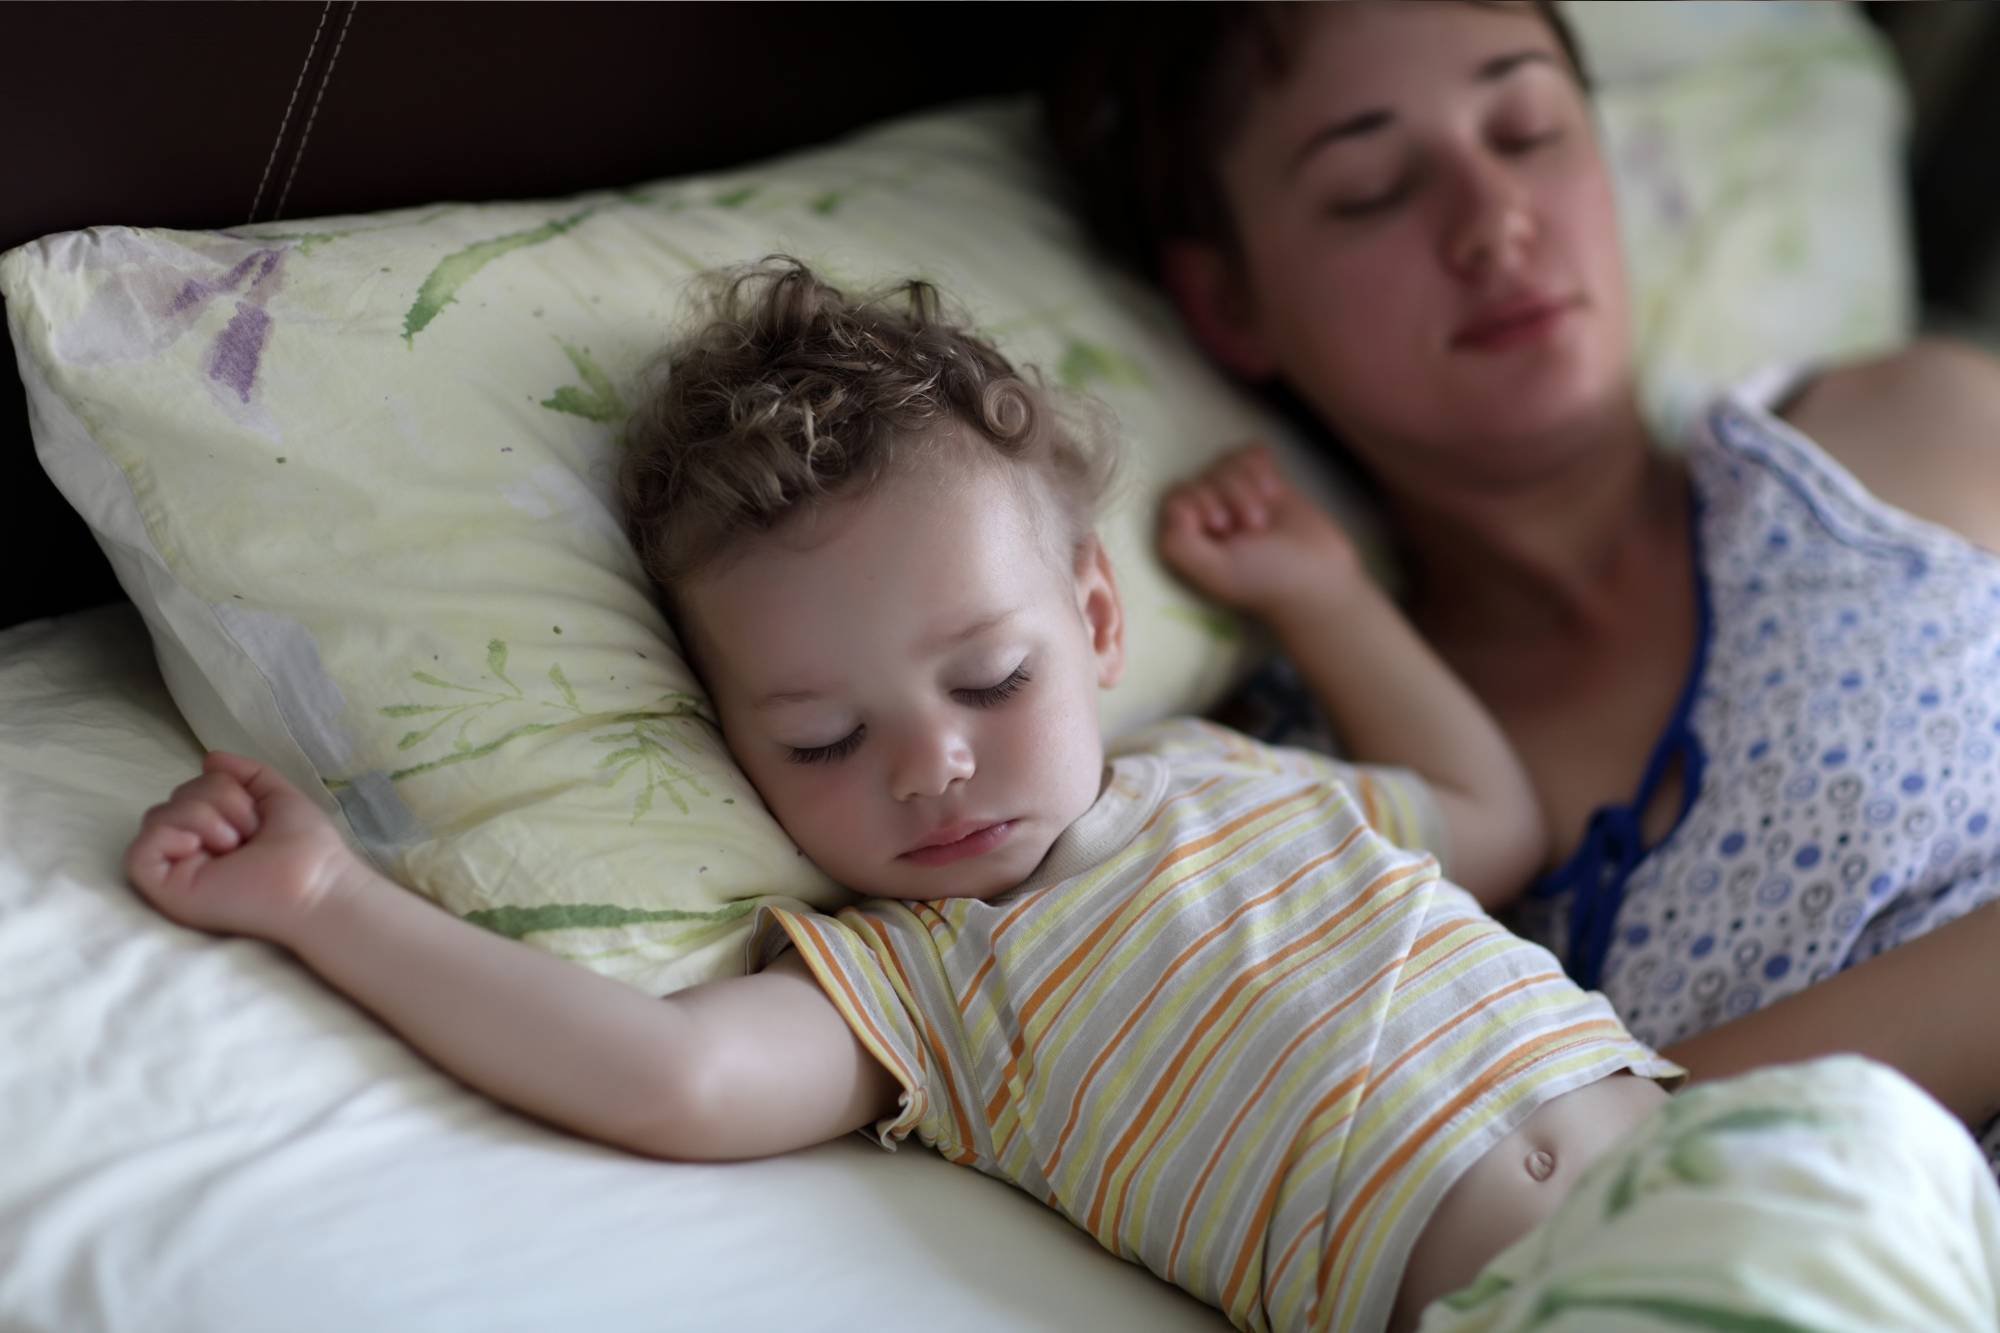 Mother and toddler asleep in bed together 